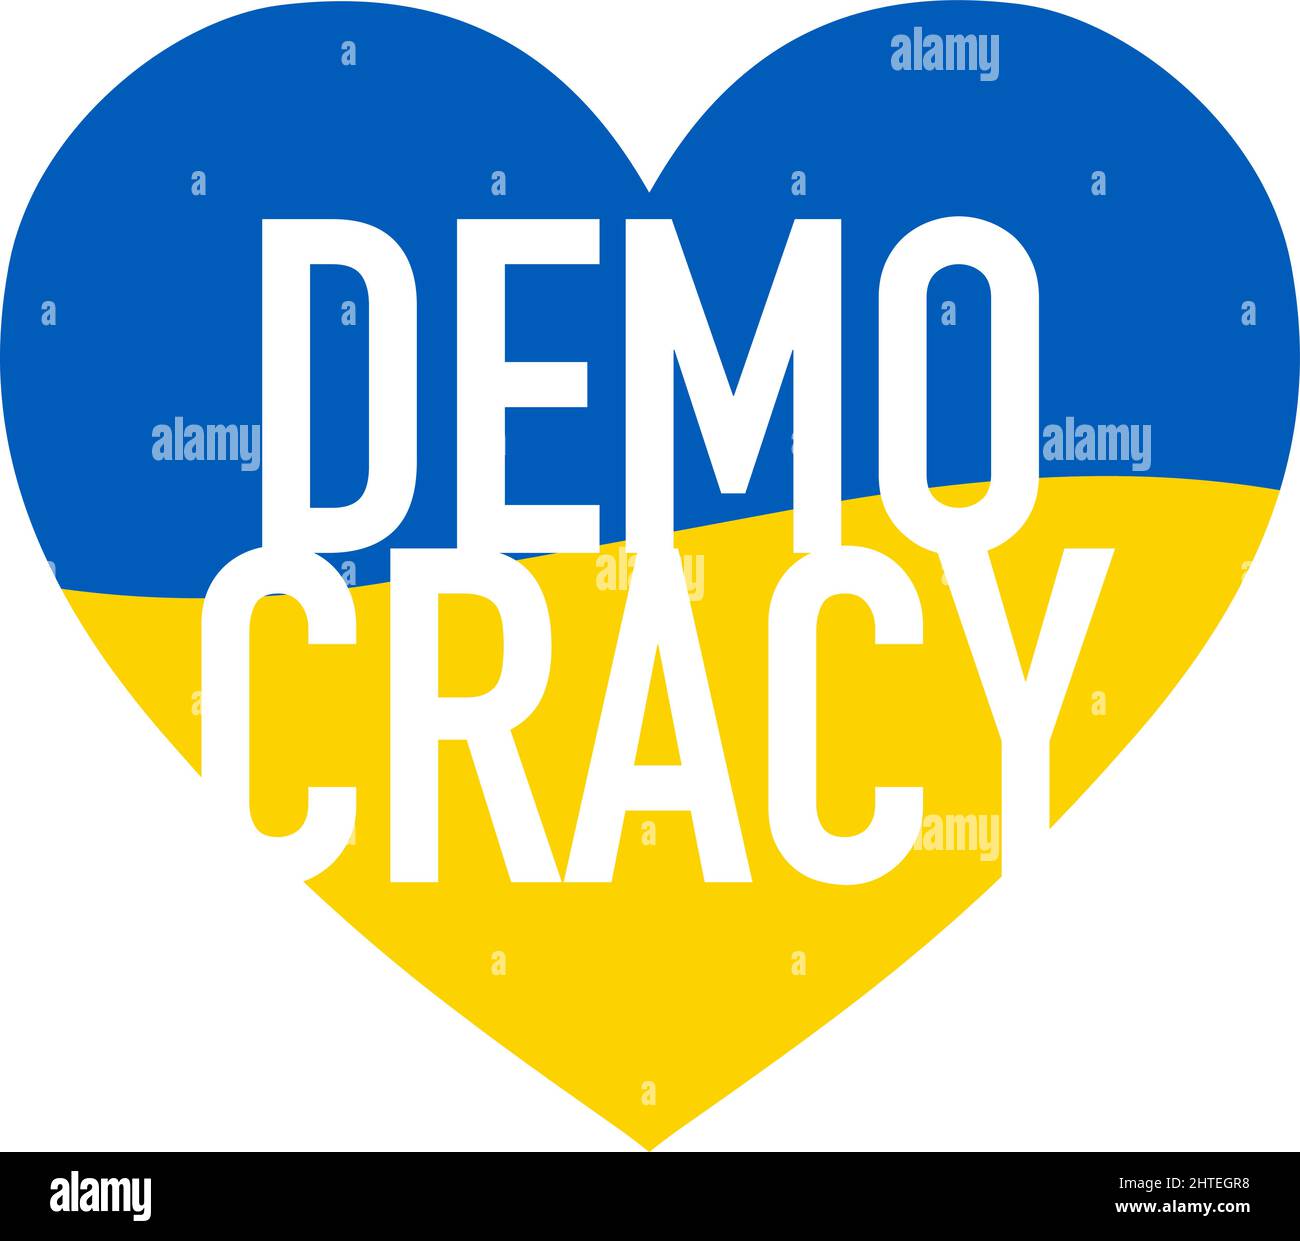 DEMOCRACY lettering on blue yellow heart. Support icon for Kyiv and Ukraine people. Stay Strong together. Patriotic symbol, icon.-SupplementalCategori Stock Vector